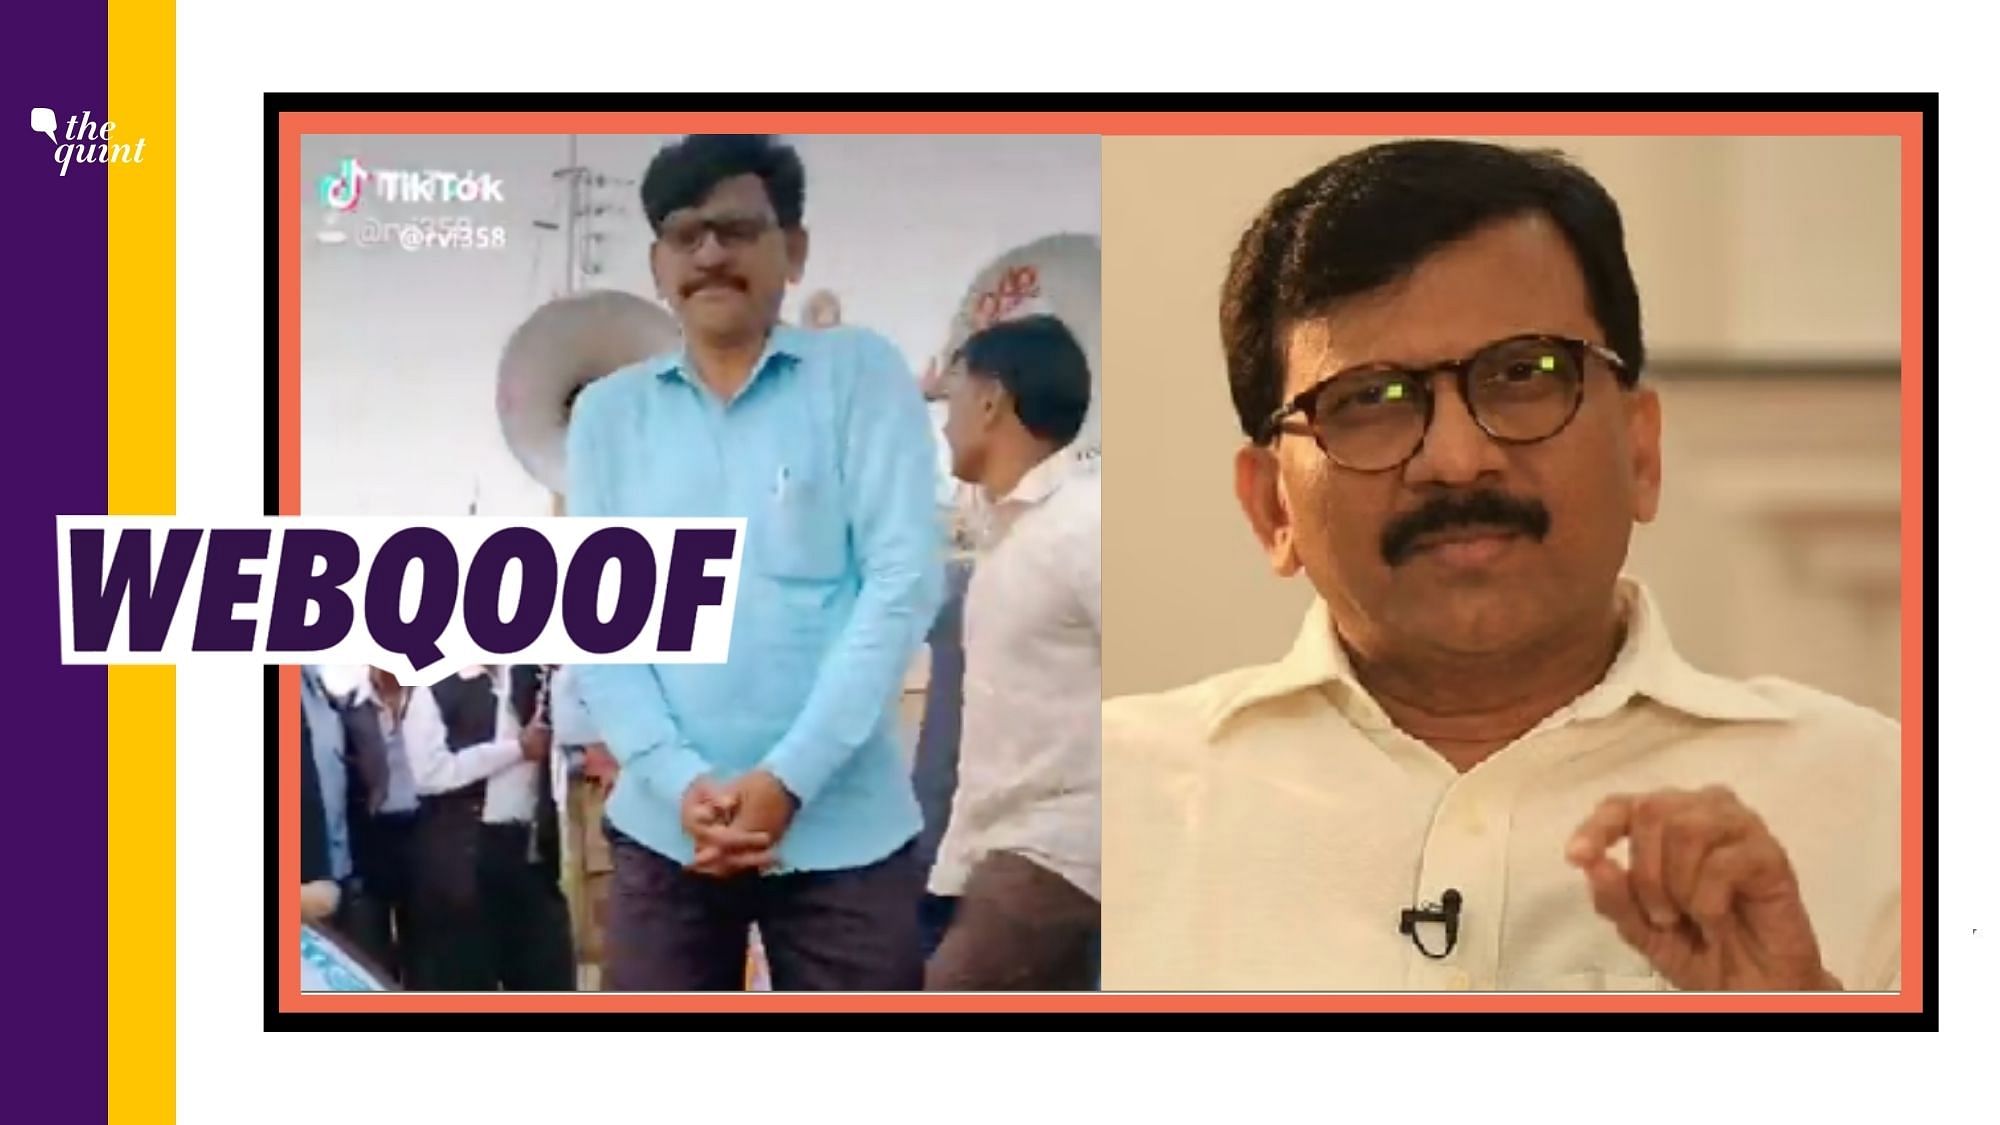 An old video of a Parbhani police officer dancing at a wedding is being shared with a false claim that it shows Sanjay Raut.